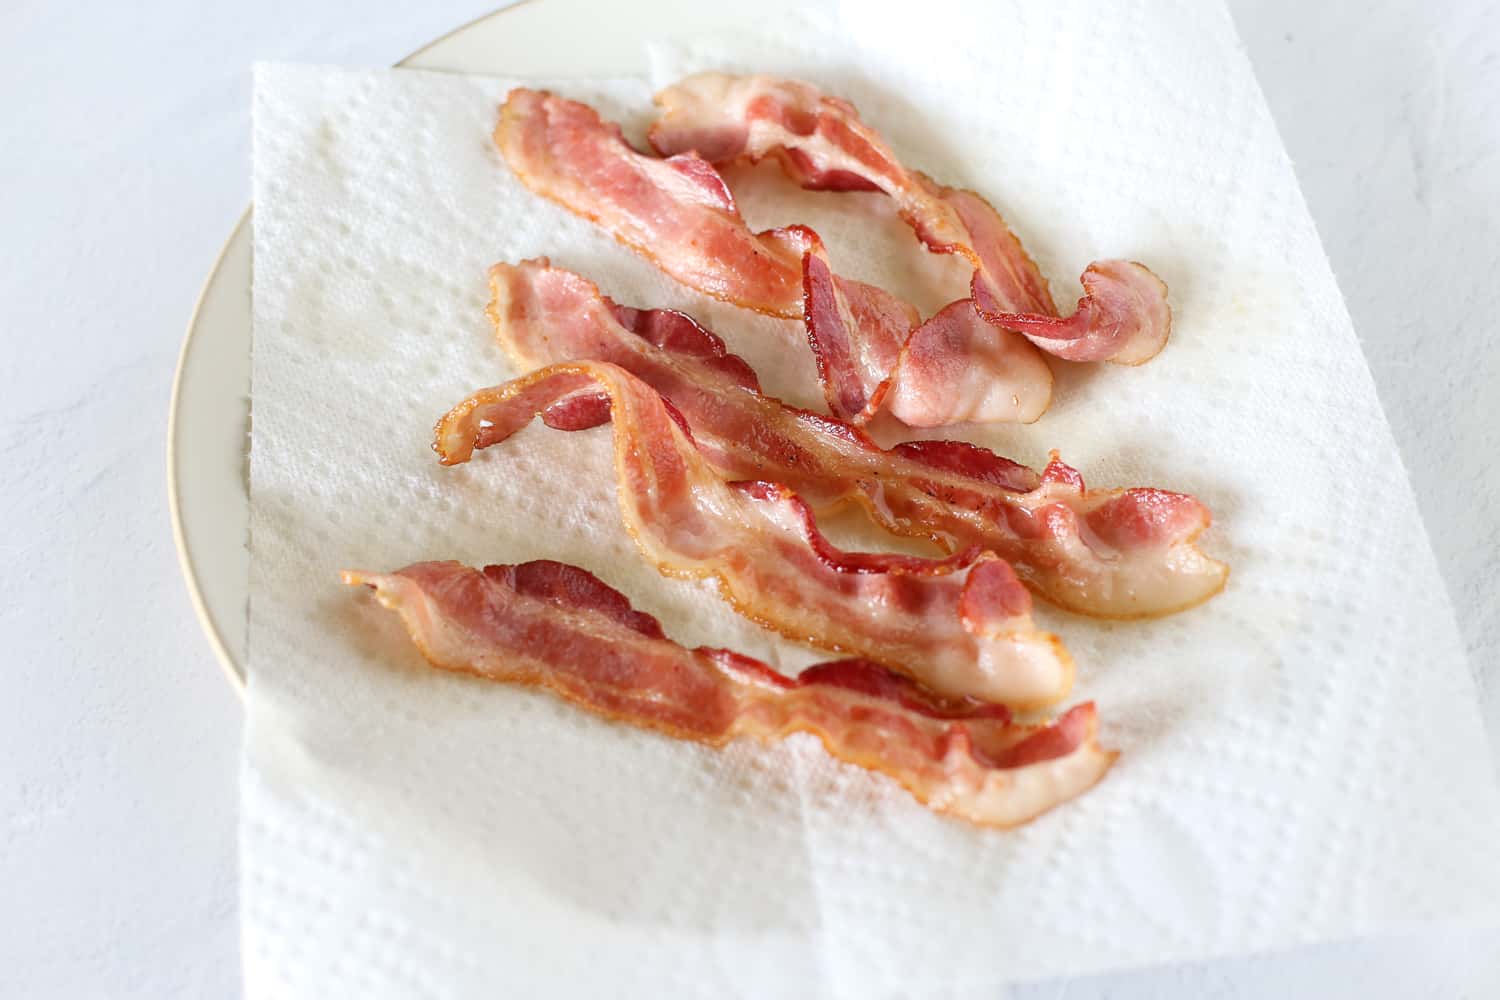 Partially cooked bacon on a paper towel on a plate.